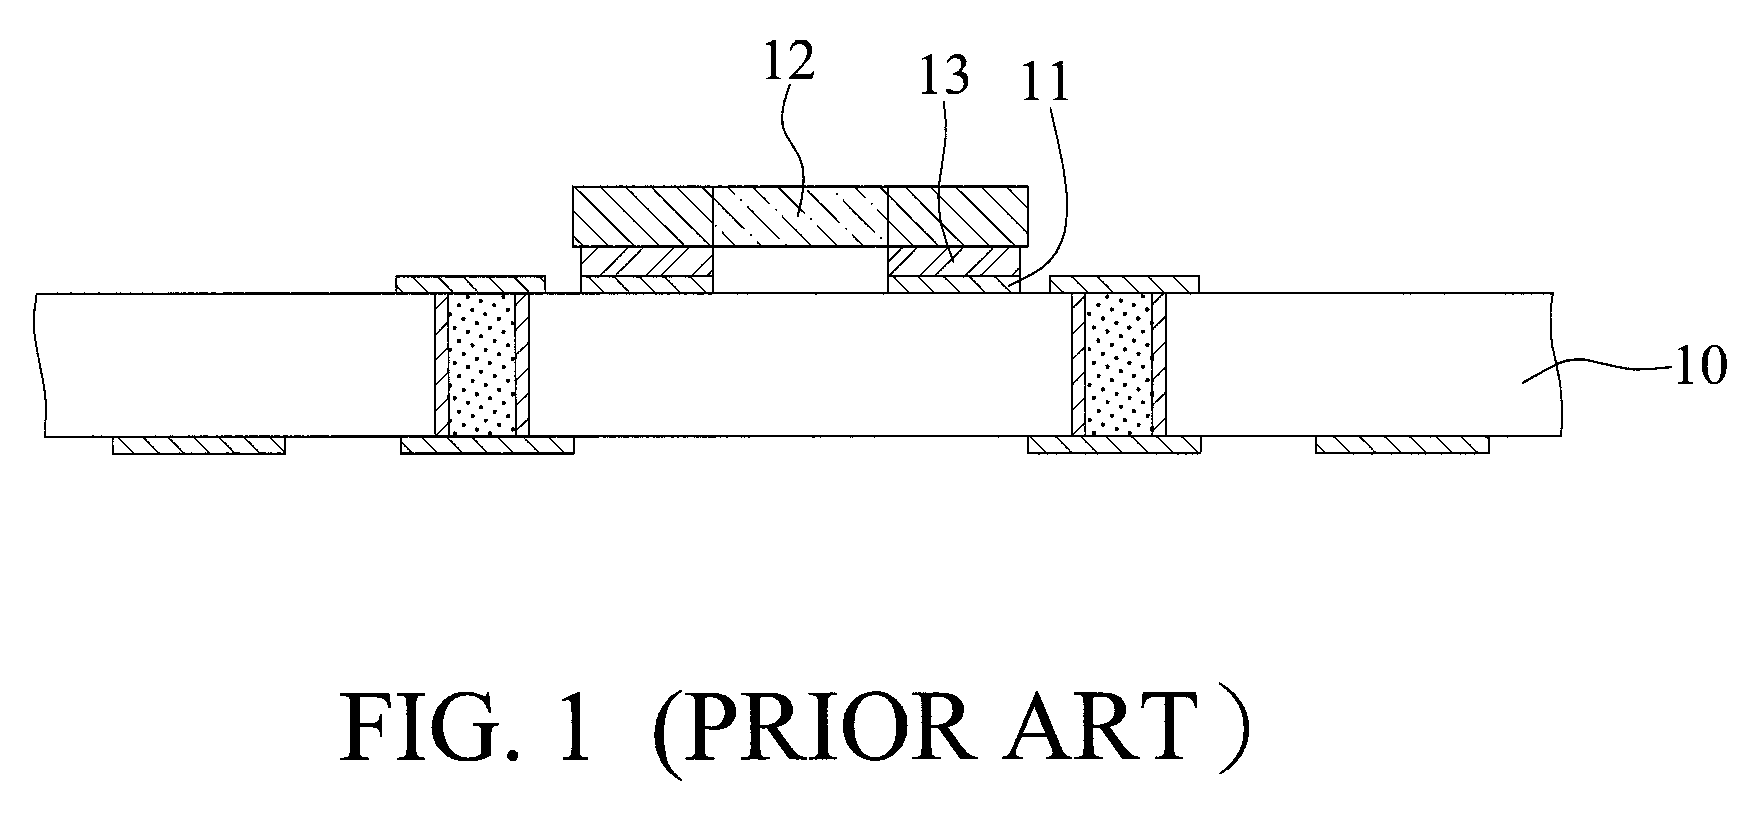 Packaging substrate having a passive element embedded therein and method of fabricating the same